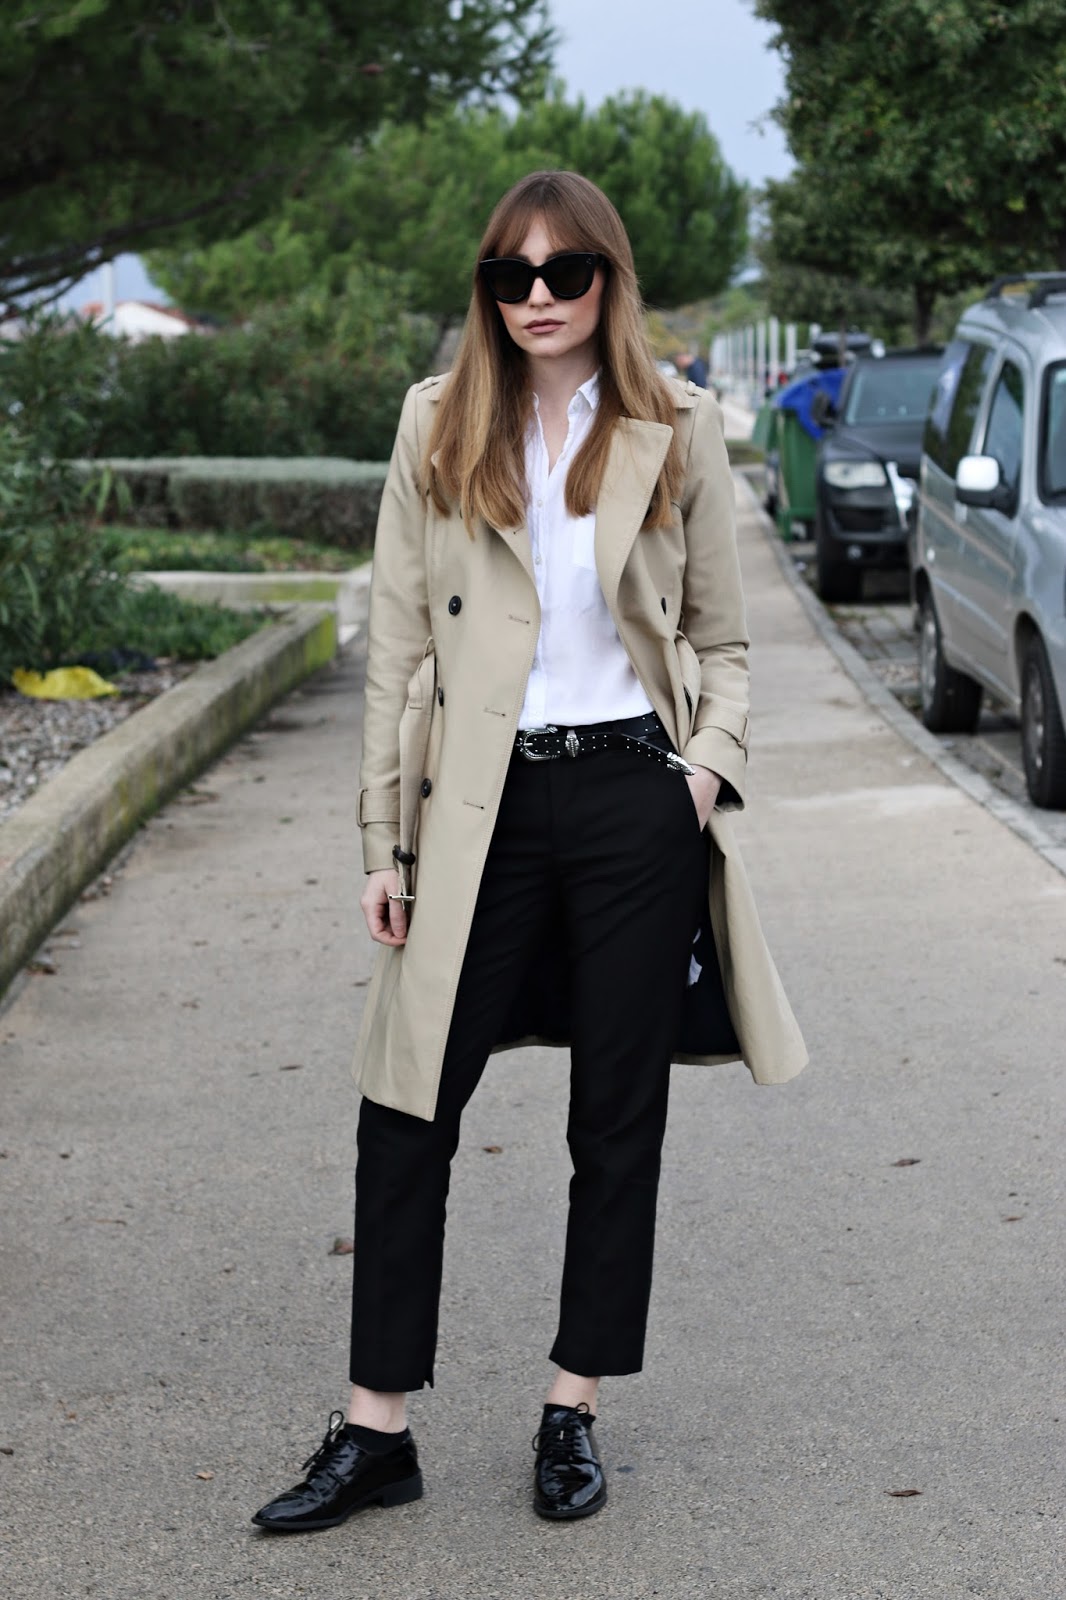 Daily Style Dose: 243. Tuesdays.